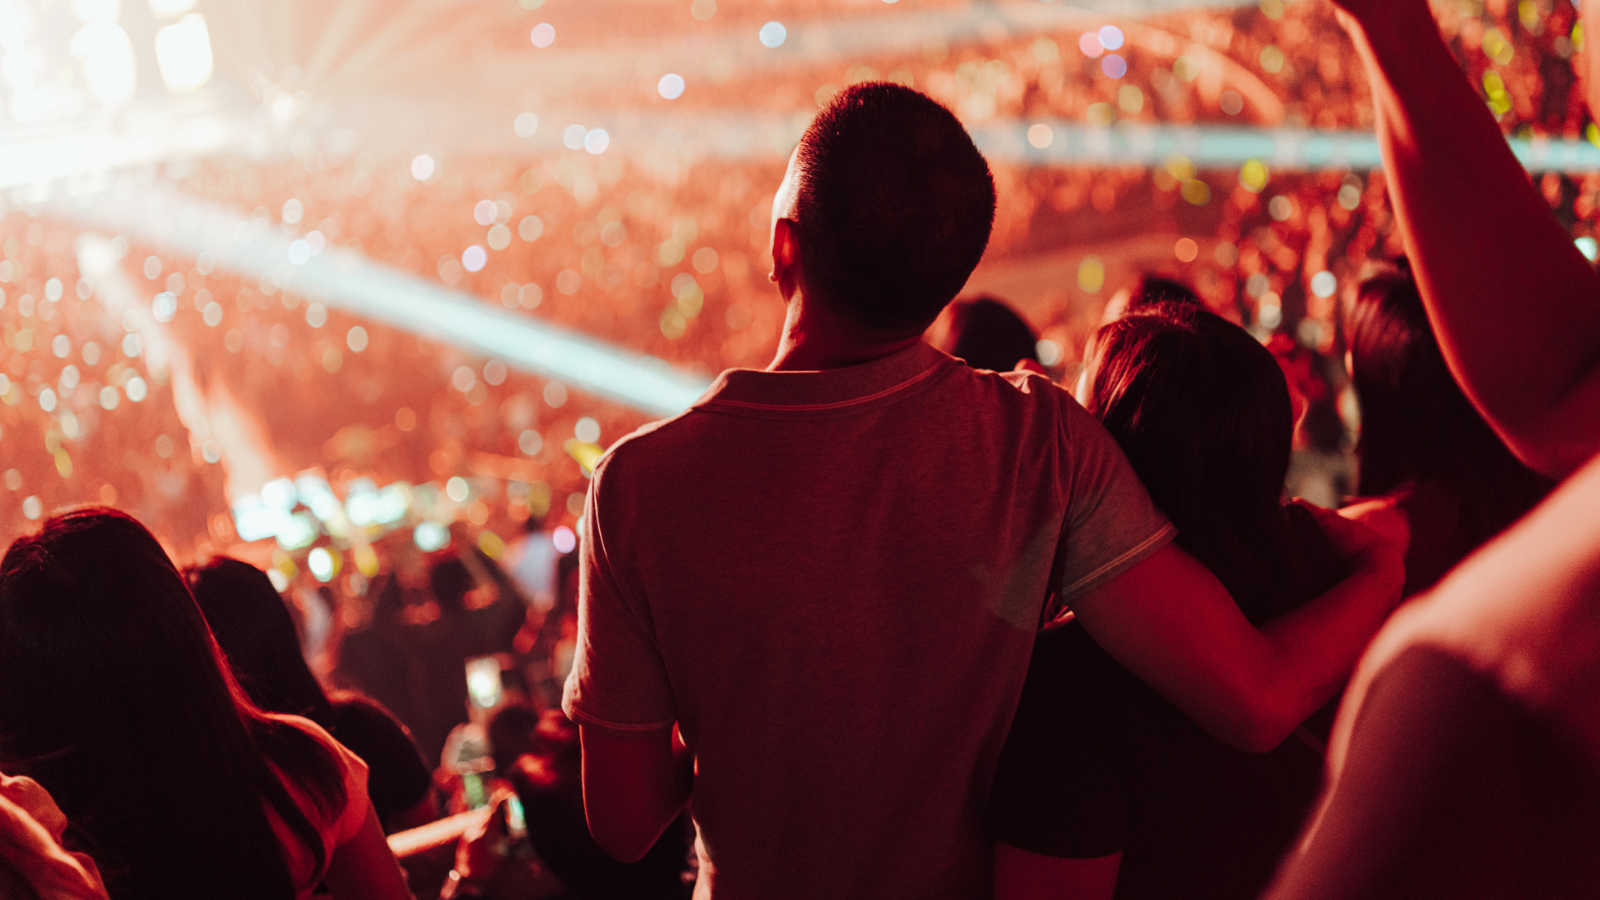 A couple at a concert together.